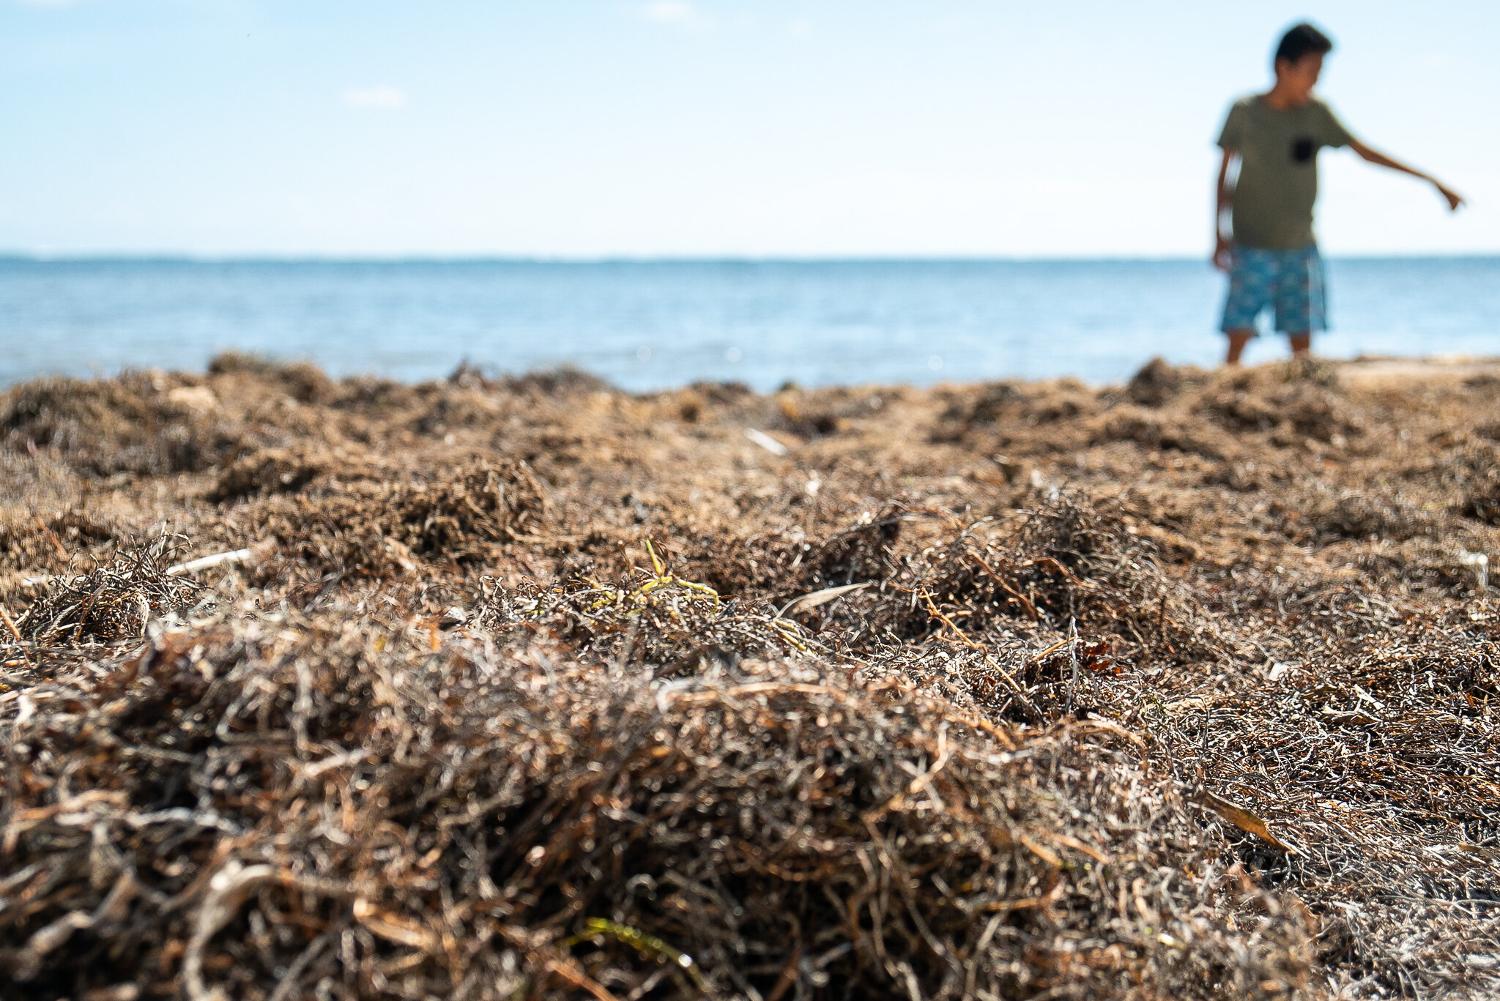 A photo of a boy on a beach in Mexico that is covered in sargassum seaweed.